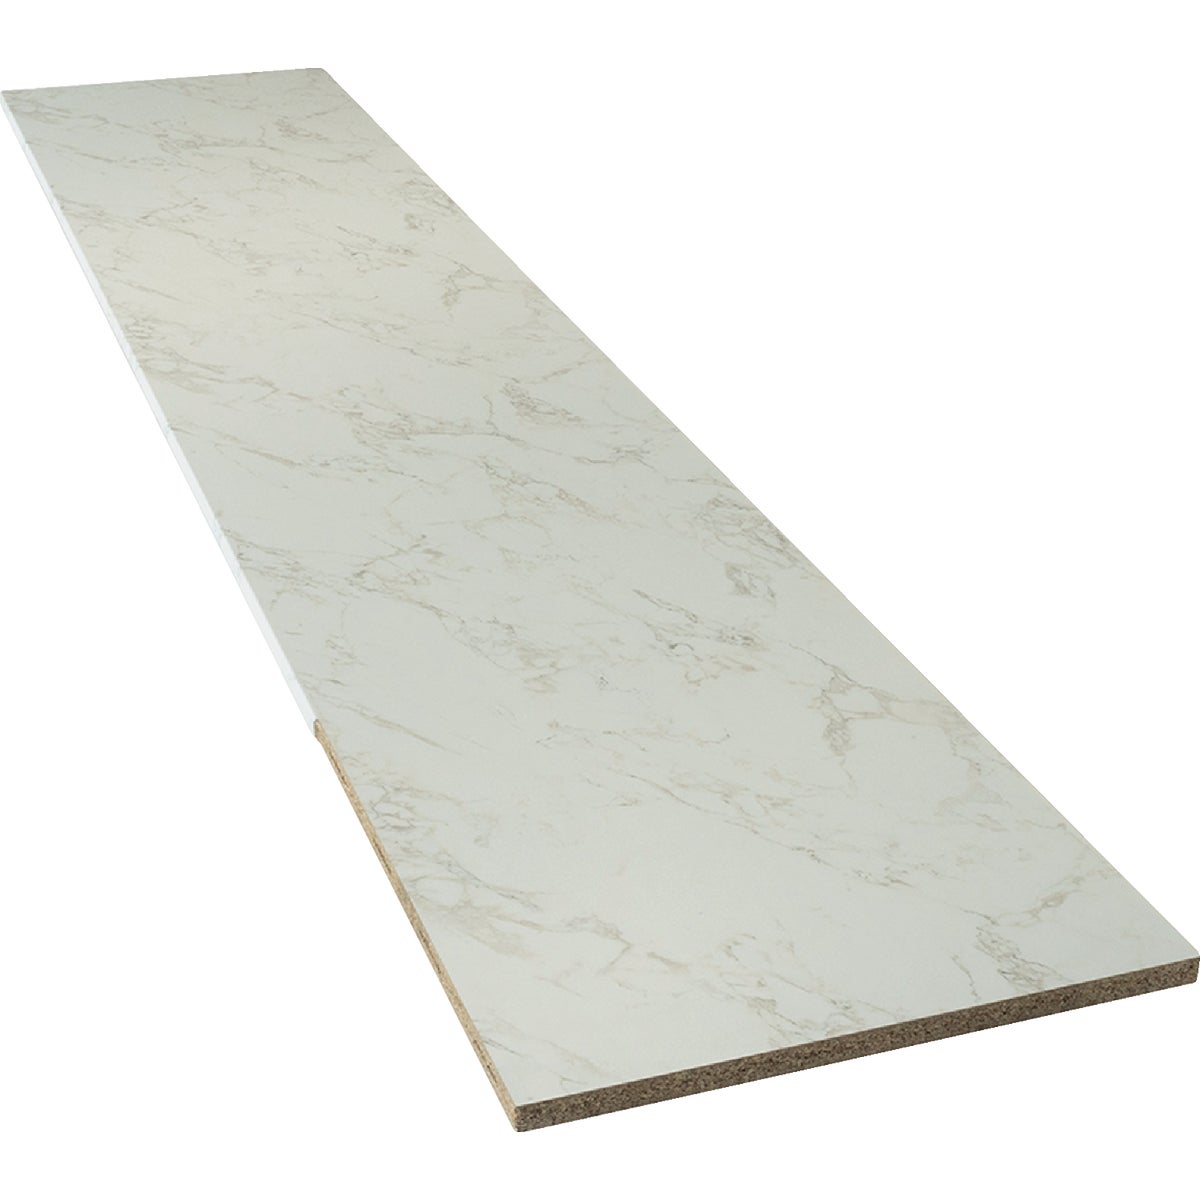 VT Industries Stretta 10 Ft. Right Hand Laminate White Marble Countertop